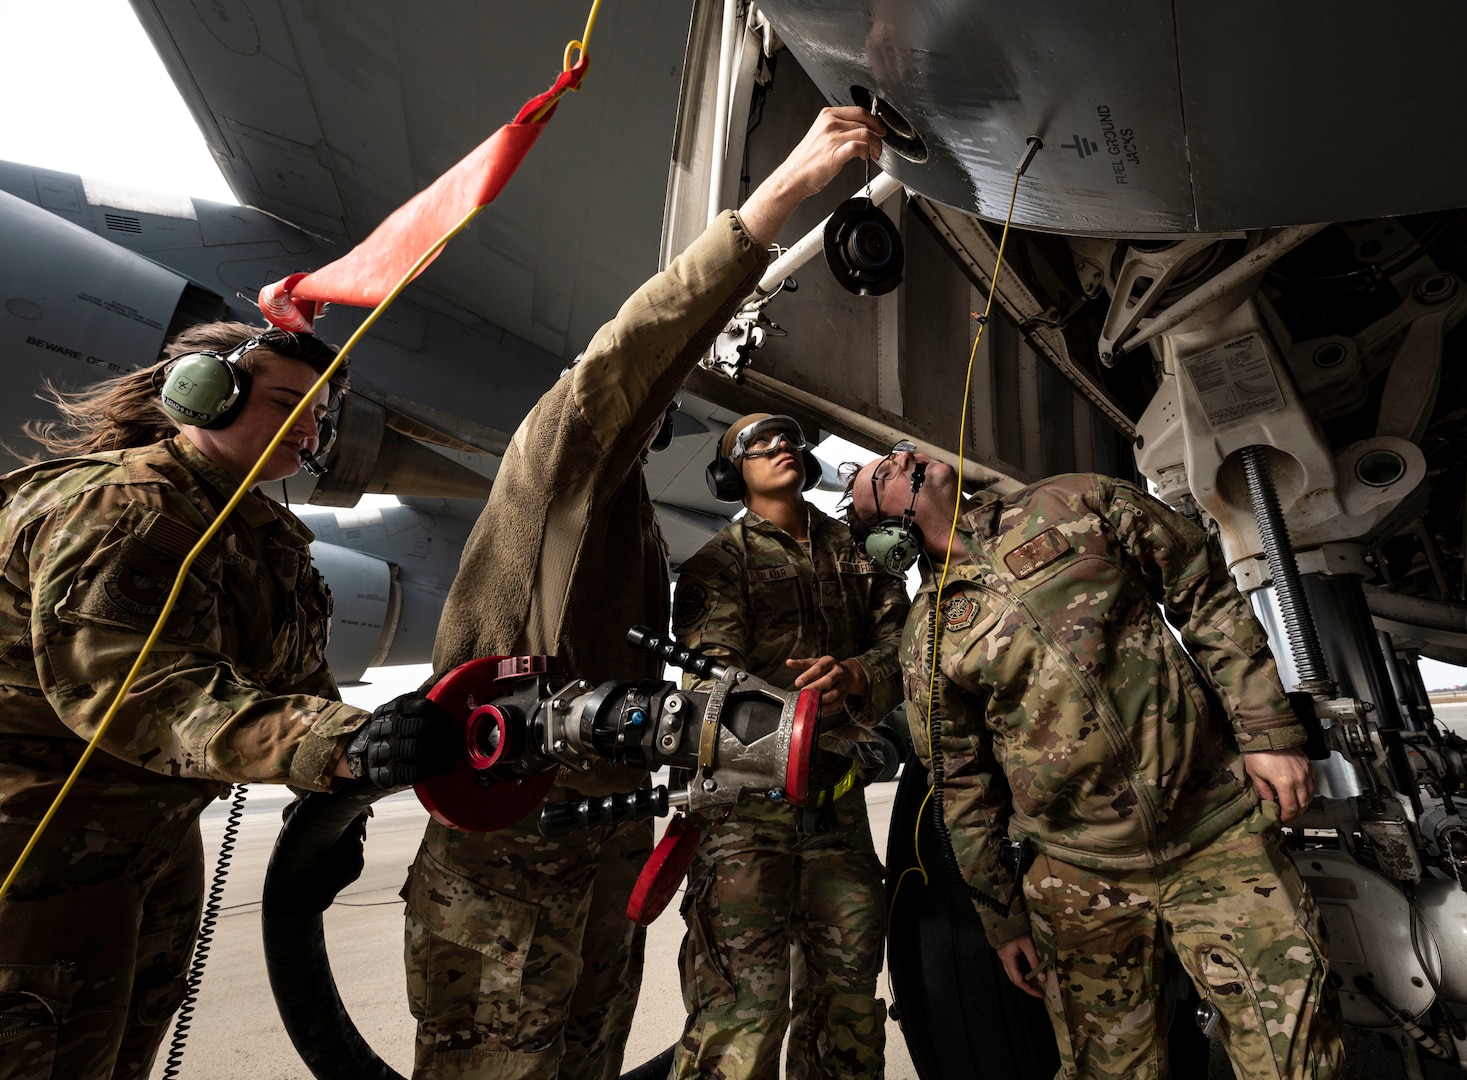 Airmen from the 436th Logistics Readiness Squadron and 9th Airlift Squadron discuss fuel hose attachment procedures on a C-5M Super Galaxy during a wet wing defuel at Dover Air Force Base, Delaware, March 1, 2023. Aircrew with the 9th AS test out new capabilities that allow the C-5 to act as a mobile fuel station and deposit fuel from the aircraft fuel tanks, into tankers standing by. (U.S. Air Force photo by Staff Sgt. Marco A. Gomez)